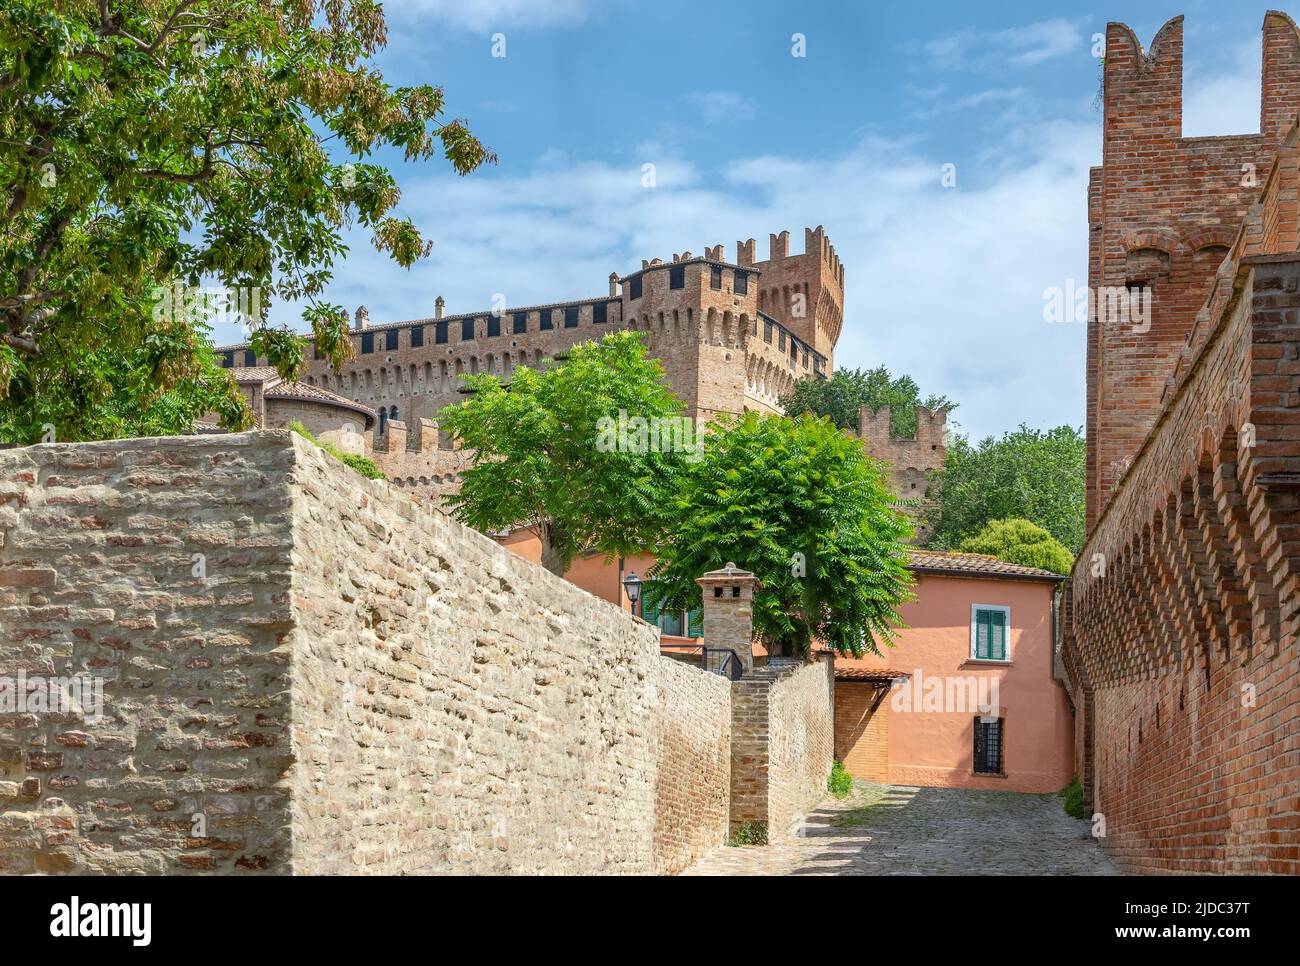 Gradara, Italy, the Malatesta fortress and the walls seen from the village Stock Photo